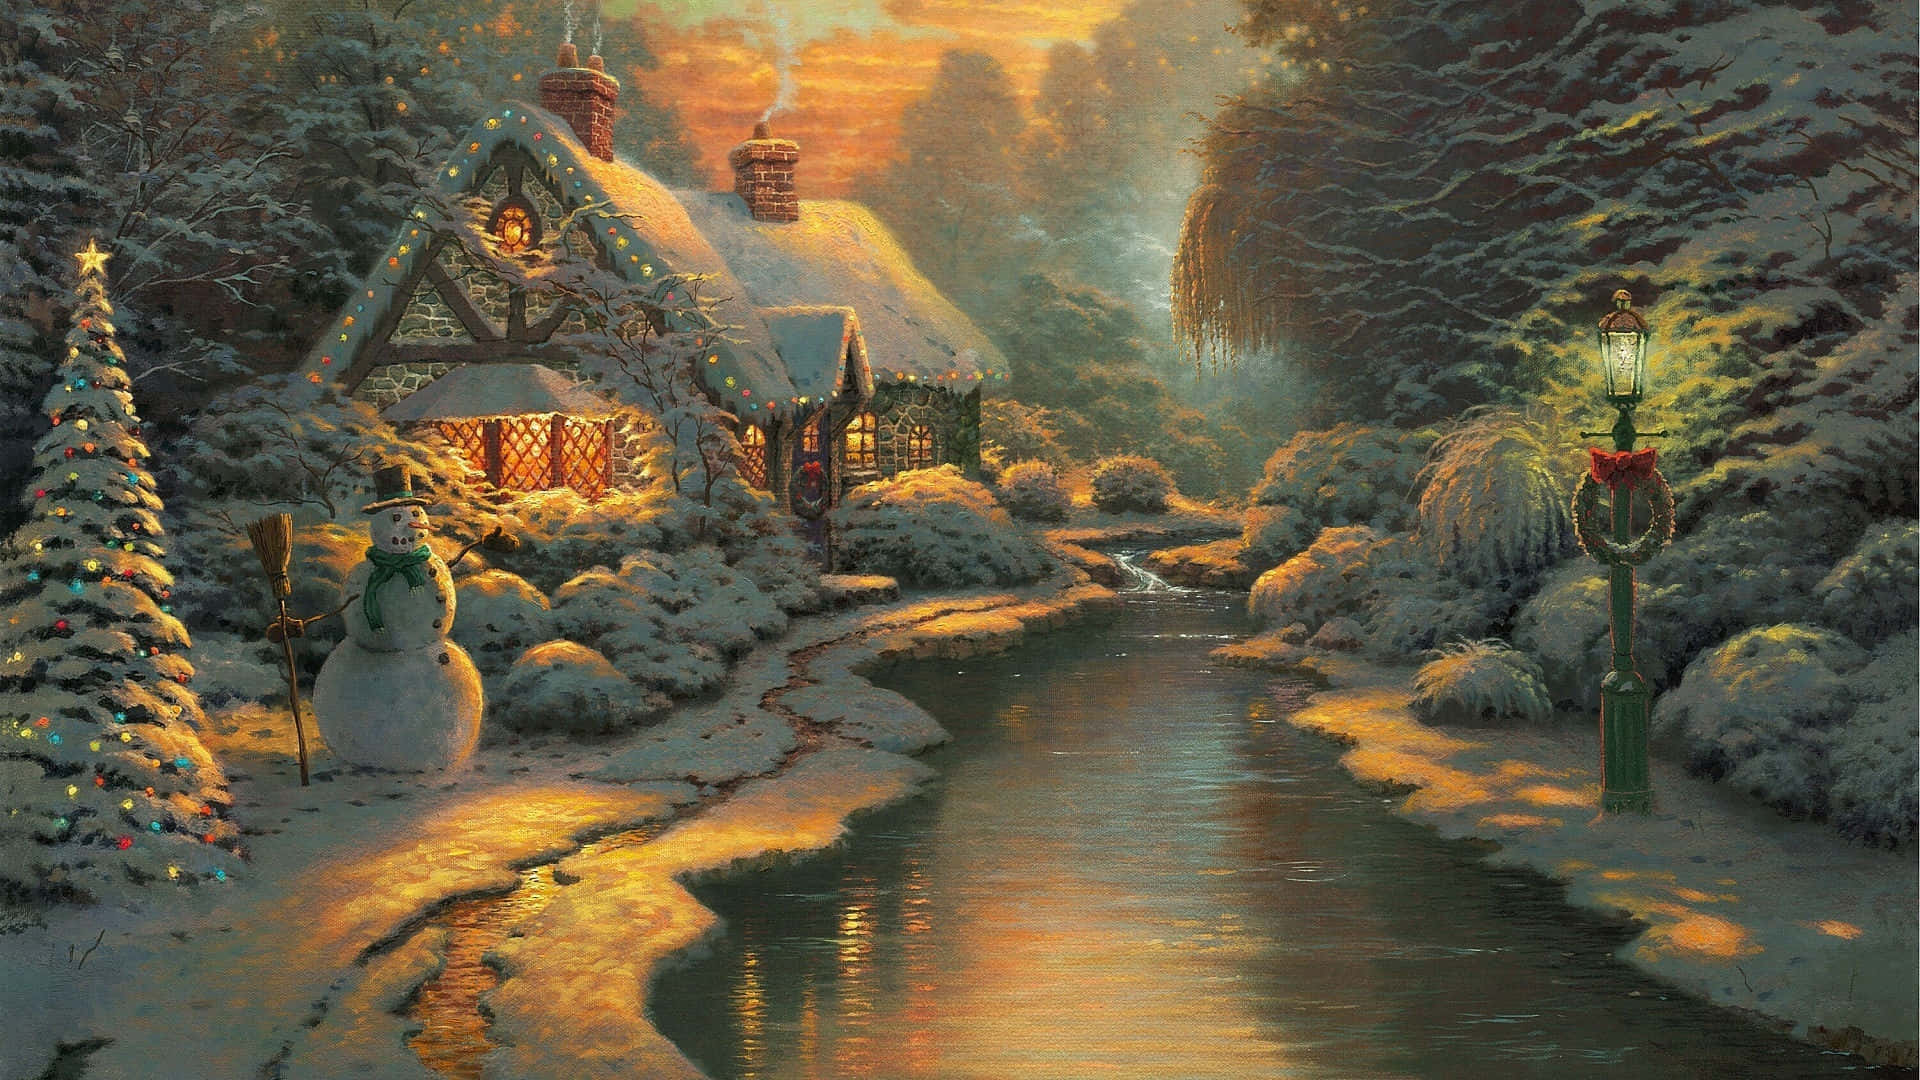 "A peaceful snowy winter morning in the Christmas village" Wallpaper